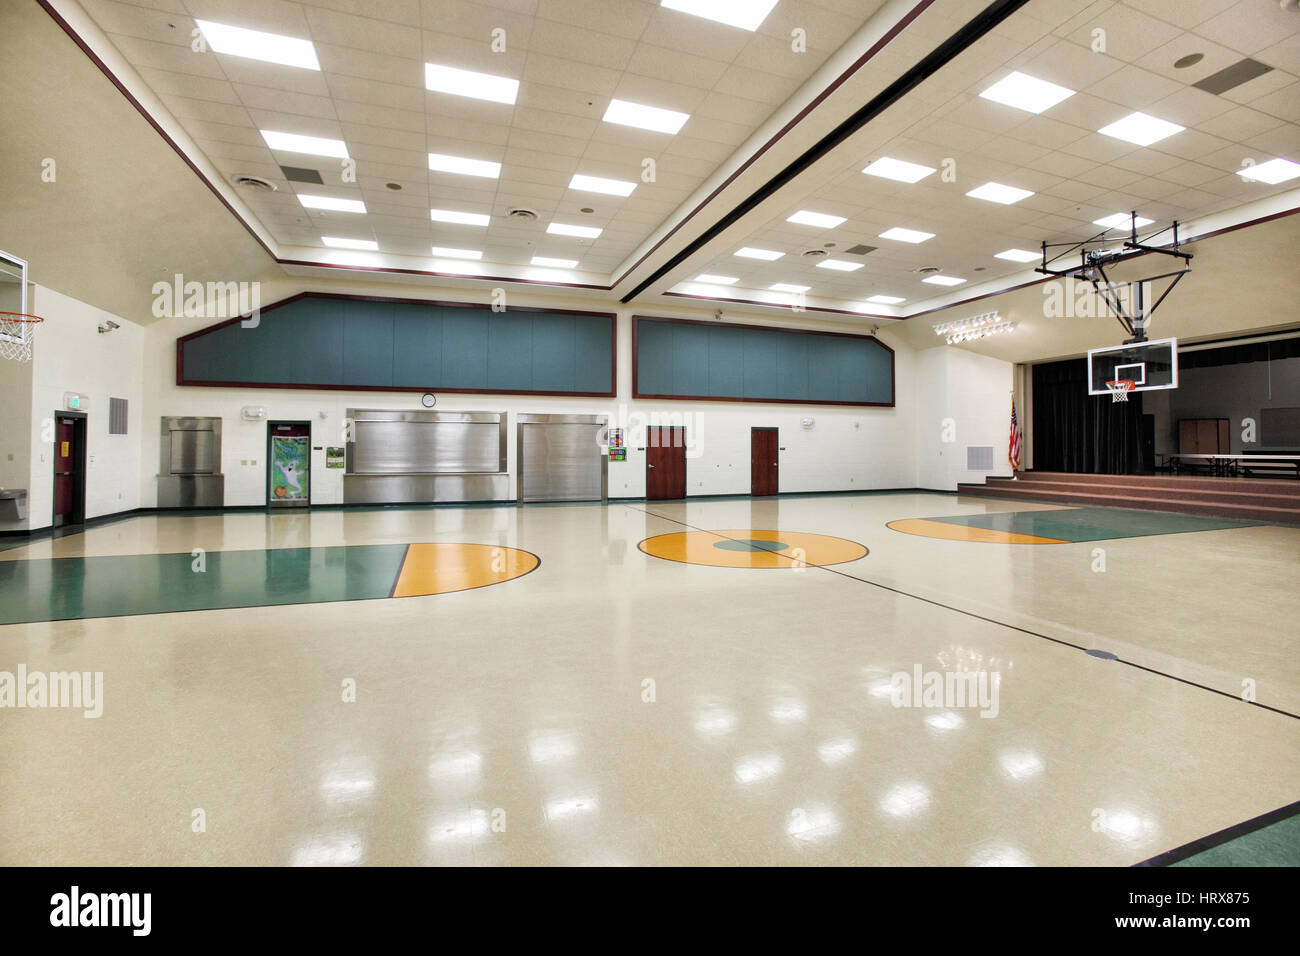 The multipurpose room in a modern elementary school, which functions as a gym, lunchroom, meeting room, and theater. Stock Photo